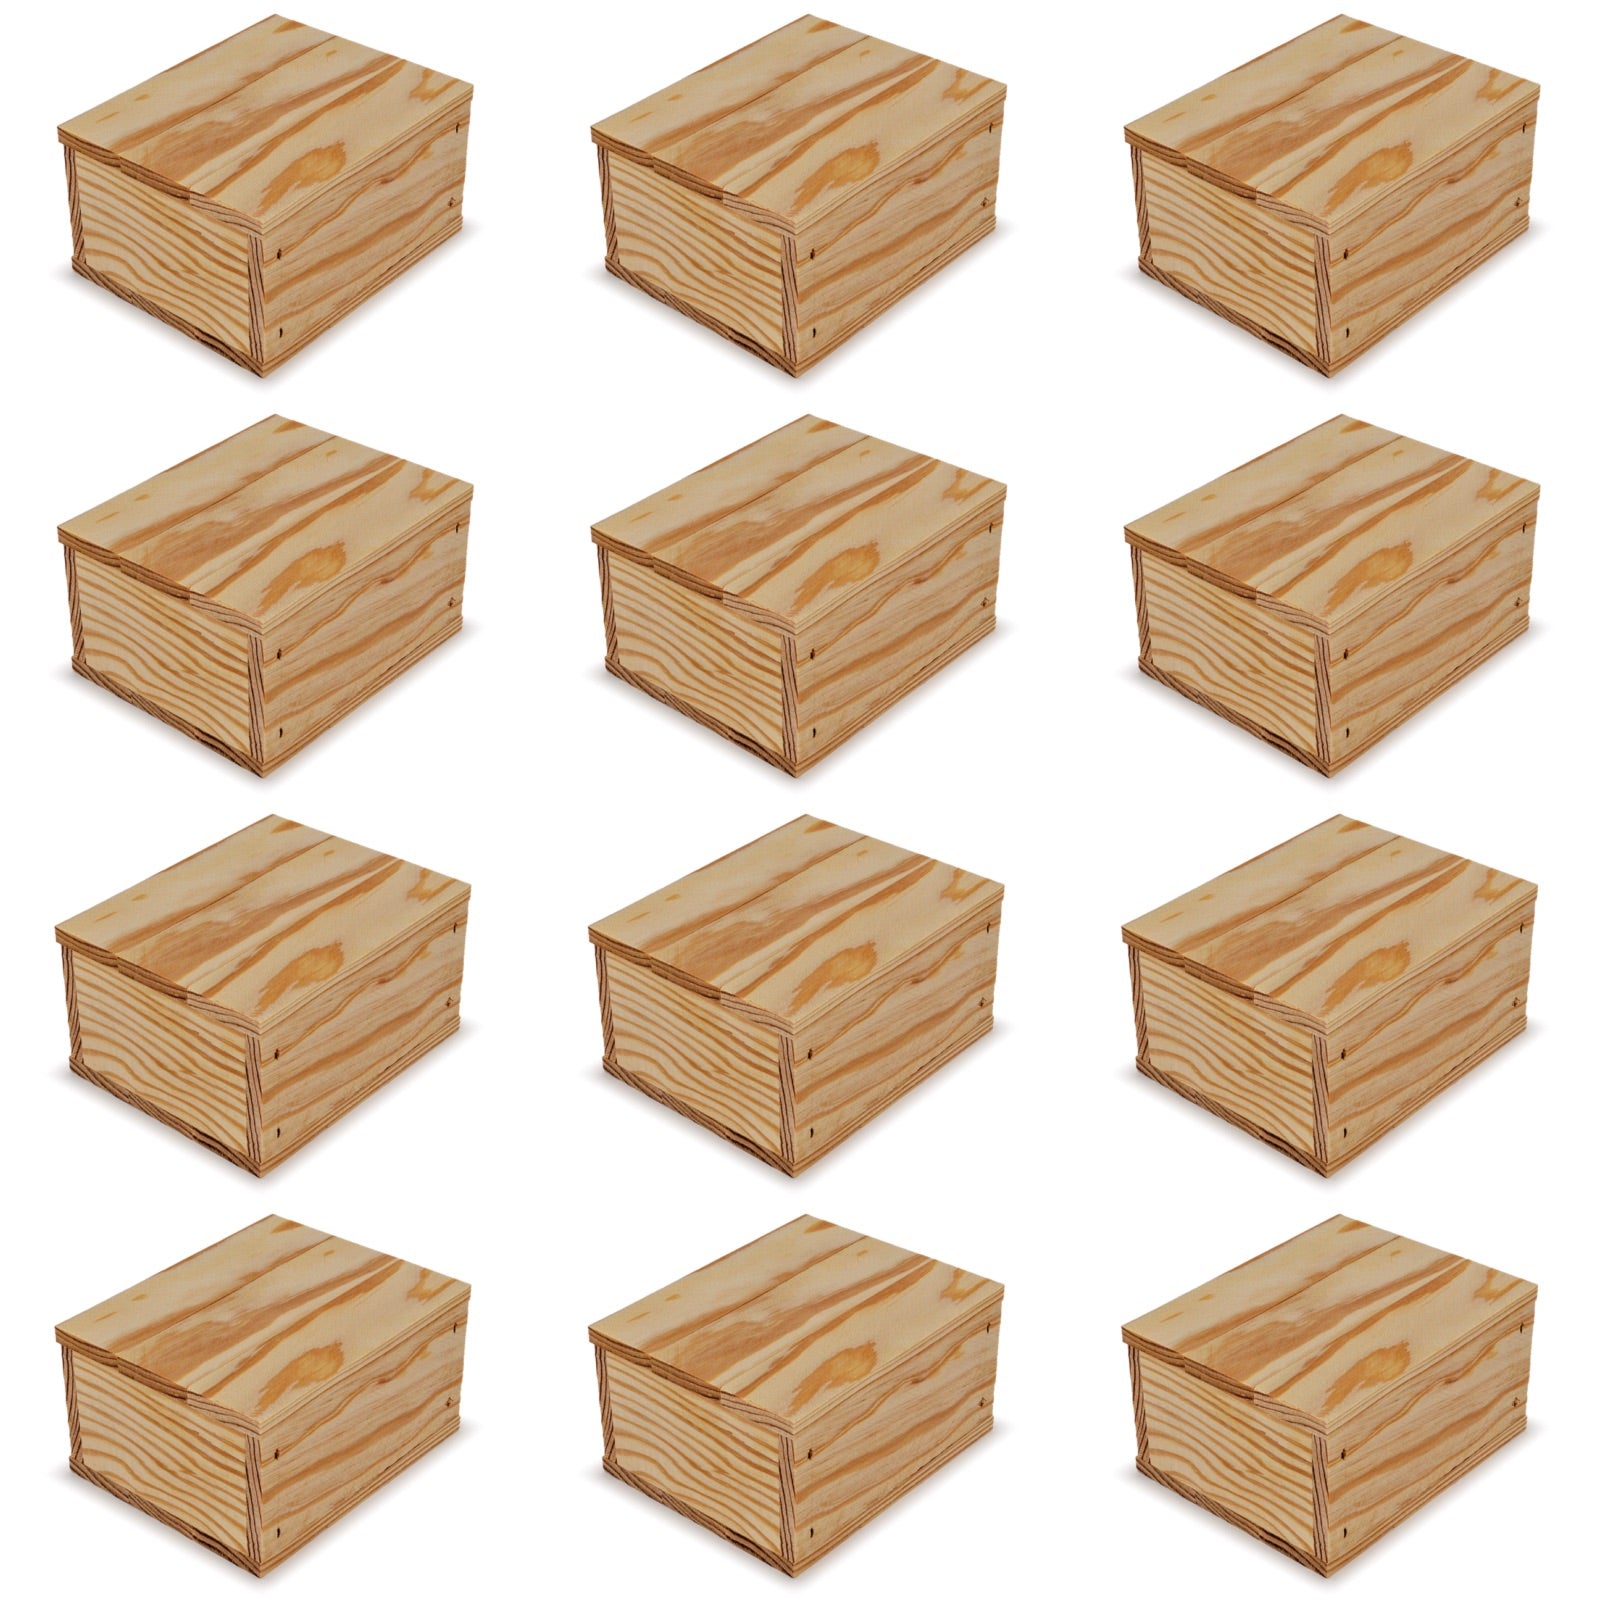 12 Small wooden crates with lid 5x4.5x2.75